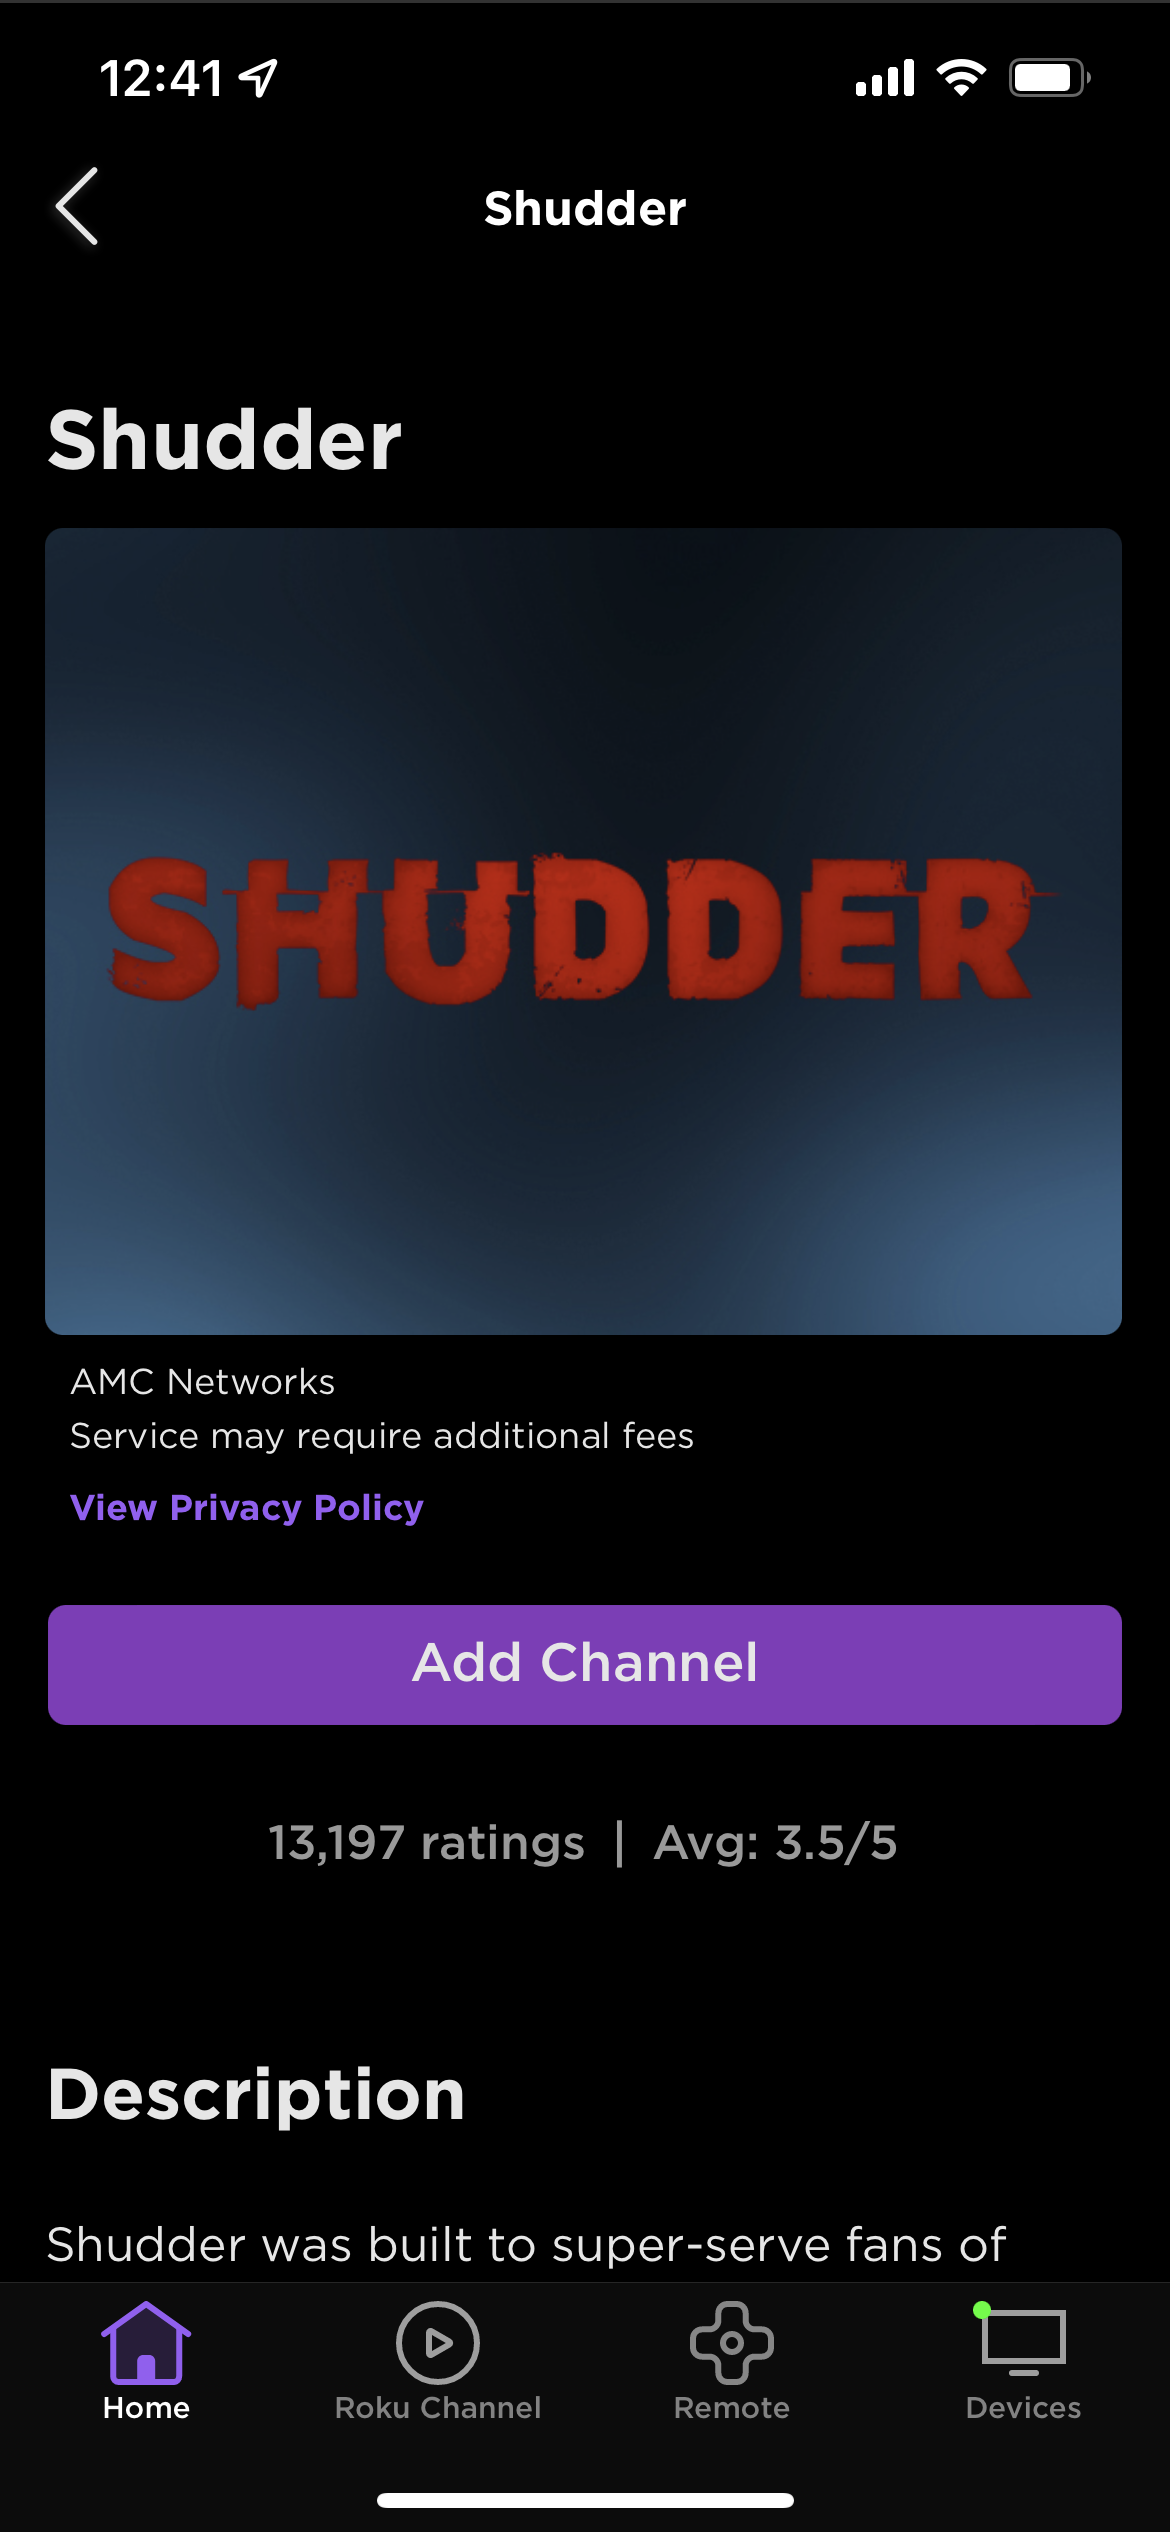 A channel listing in the Roku app